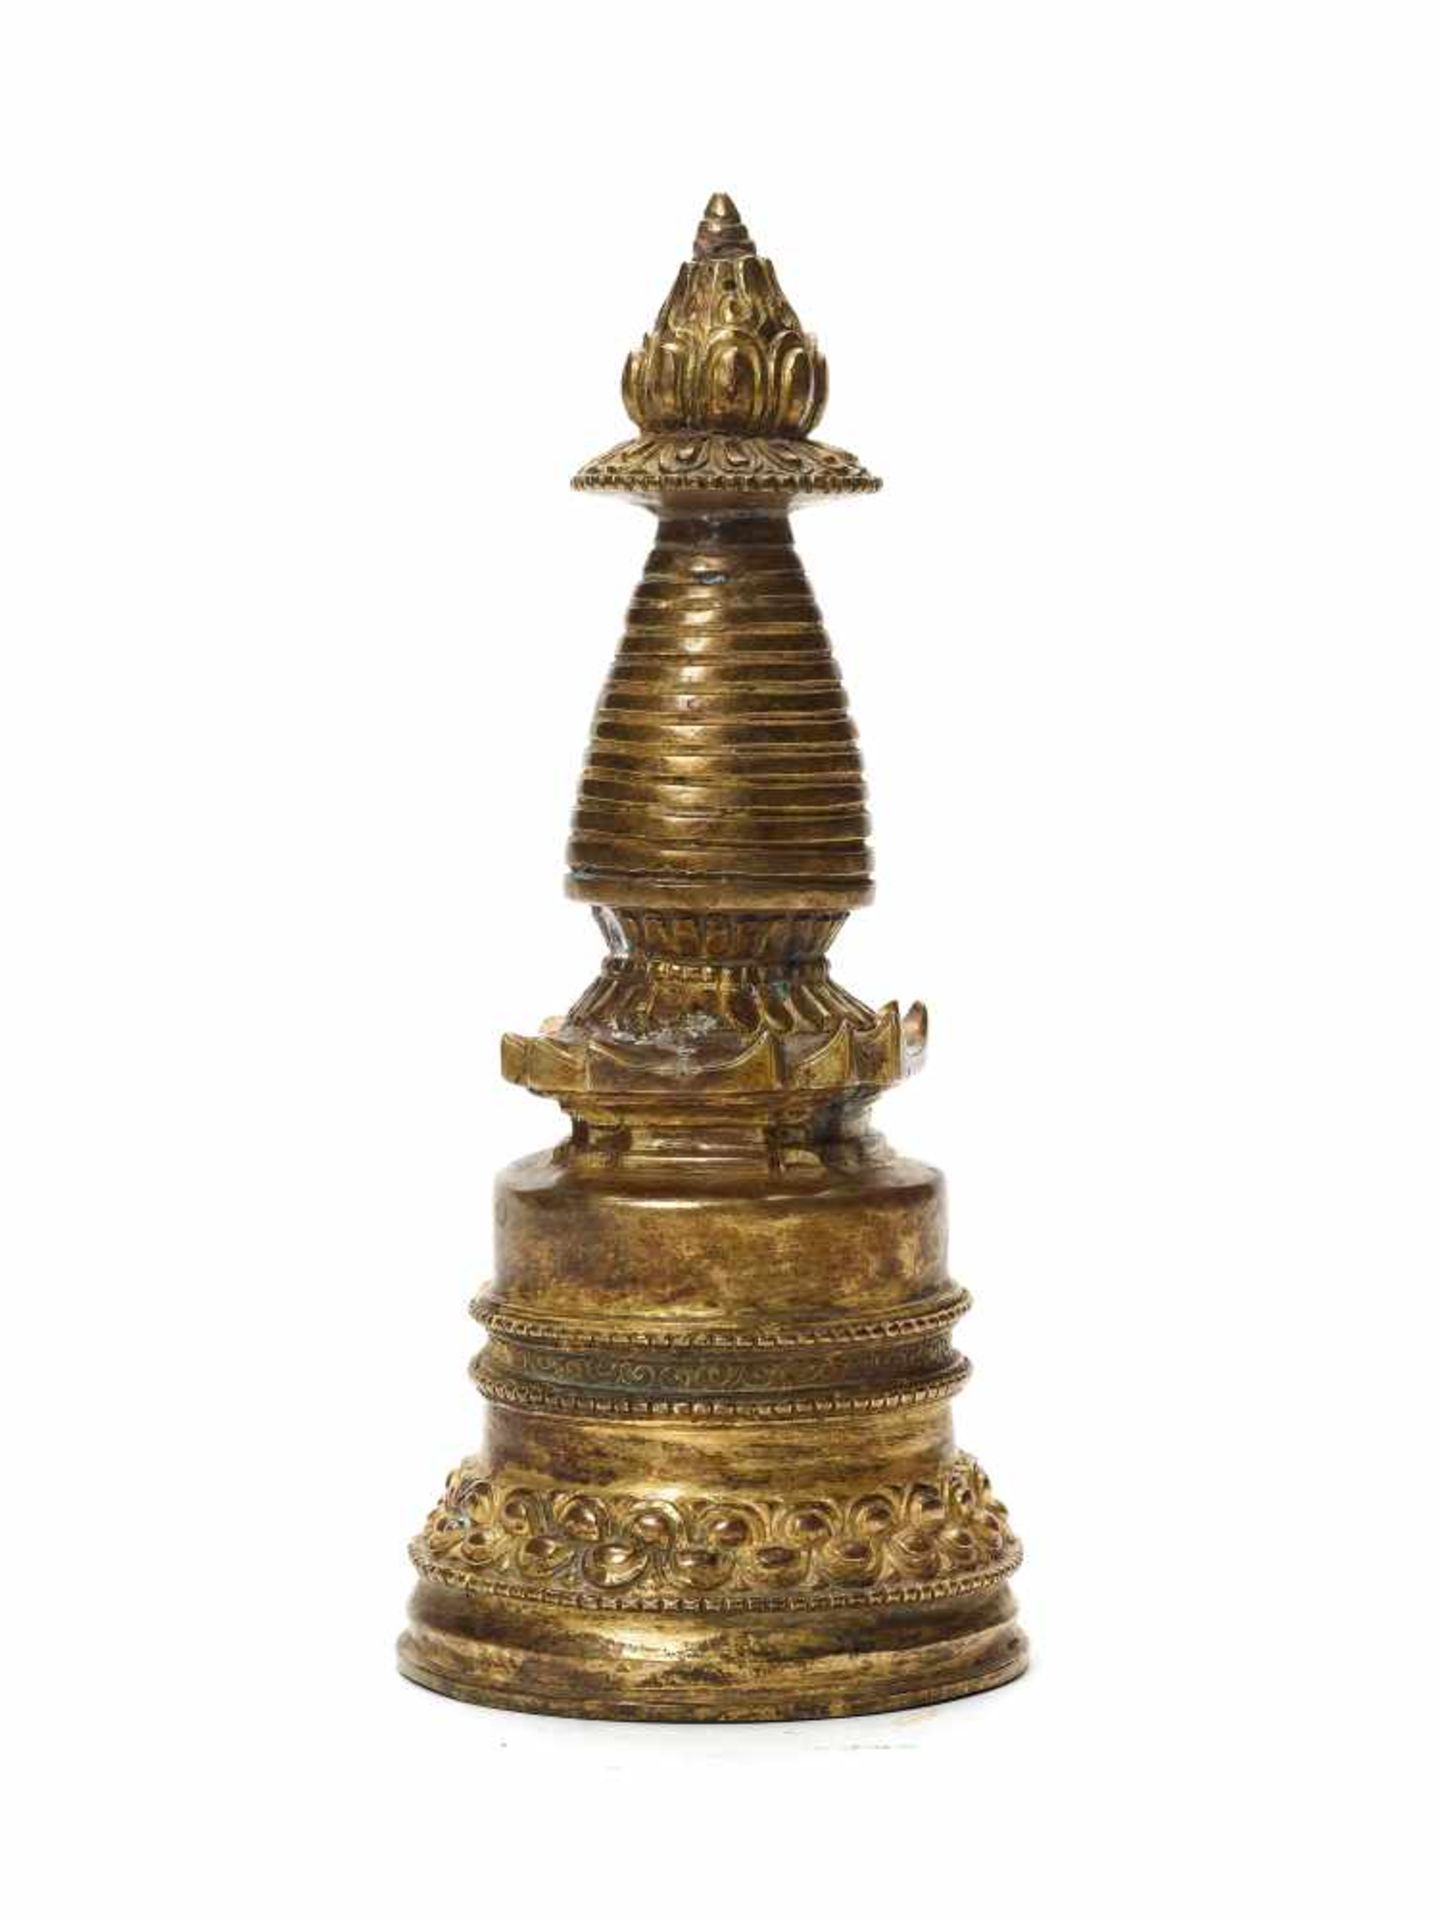 A TIBETO-CHINESE GILT BRONZE STUPA, 20th CENTURYMassively cast with some neatly incised detail work,